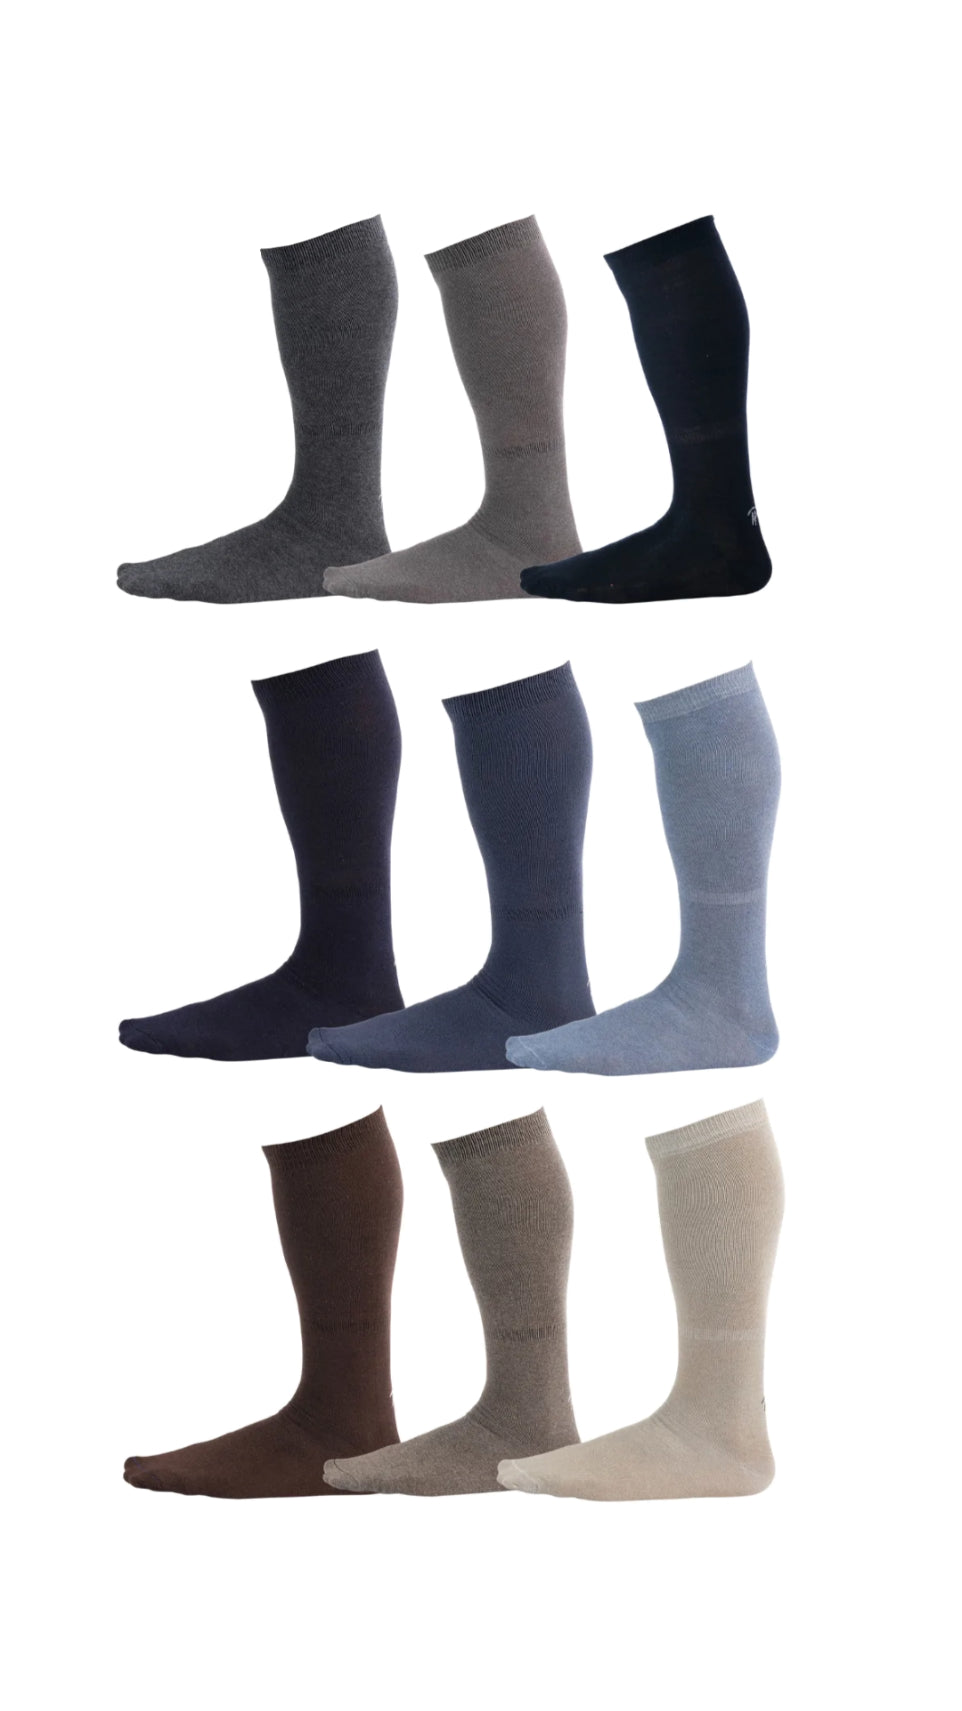 Gradients of Black, blue, and brown pairs of Pierre Henry Over the Calf Dress Socks